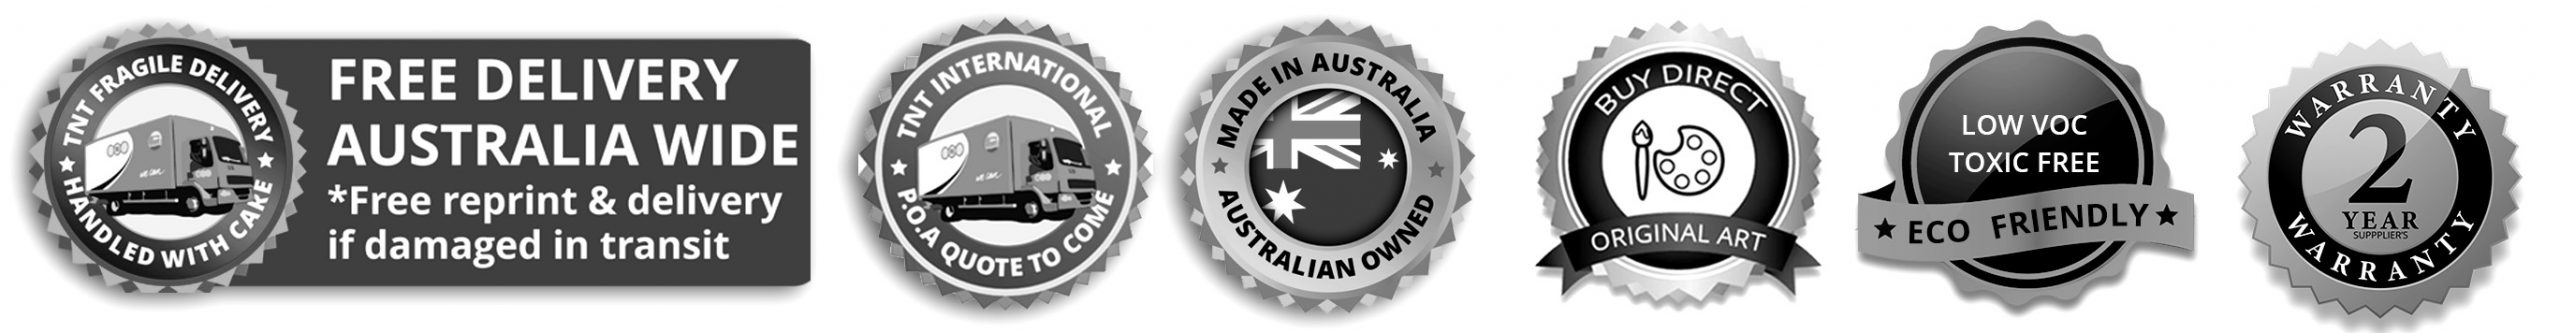 2 Year Warranty. Free Delivery Australia Wide. Low-VOC. Australian Made Banner Icons